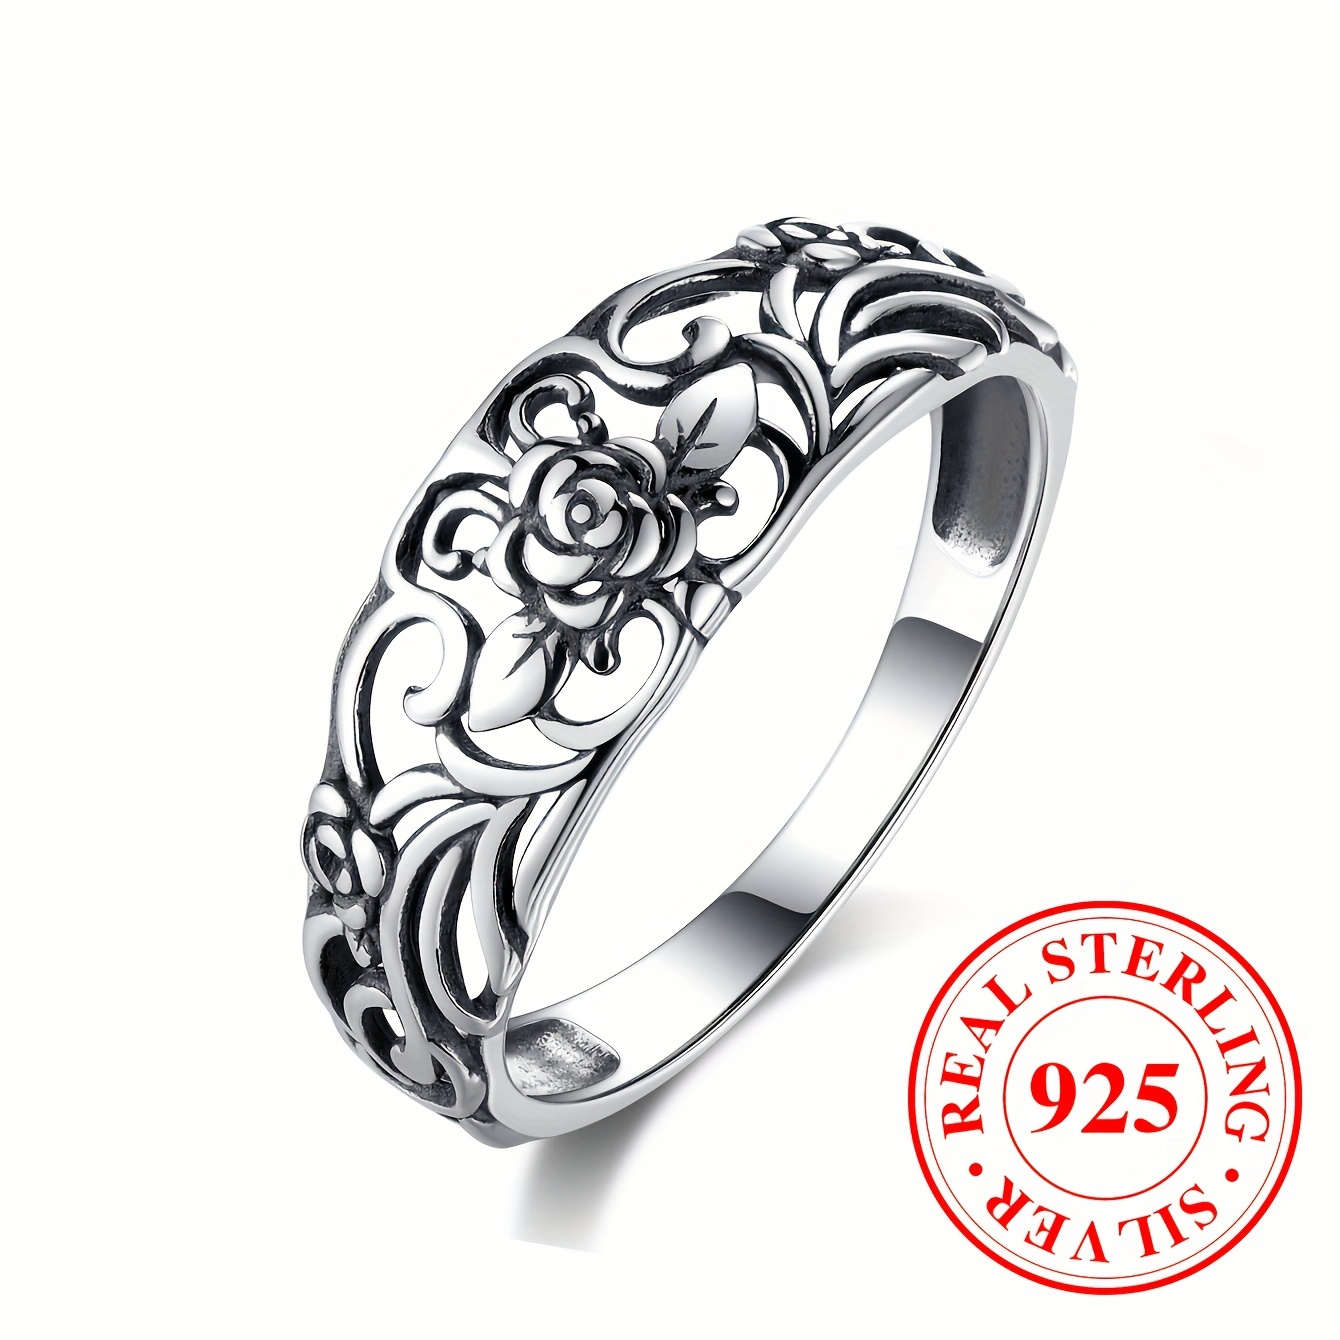 

925 Sterling Silver Ring Delicate Rose Design Symbol Of Beauty And Romance High Quality Engagement/ Wedding Ring With Gift Box